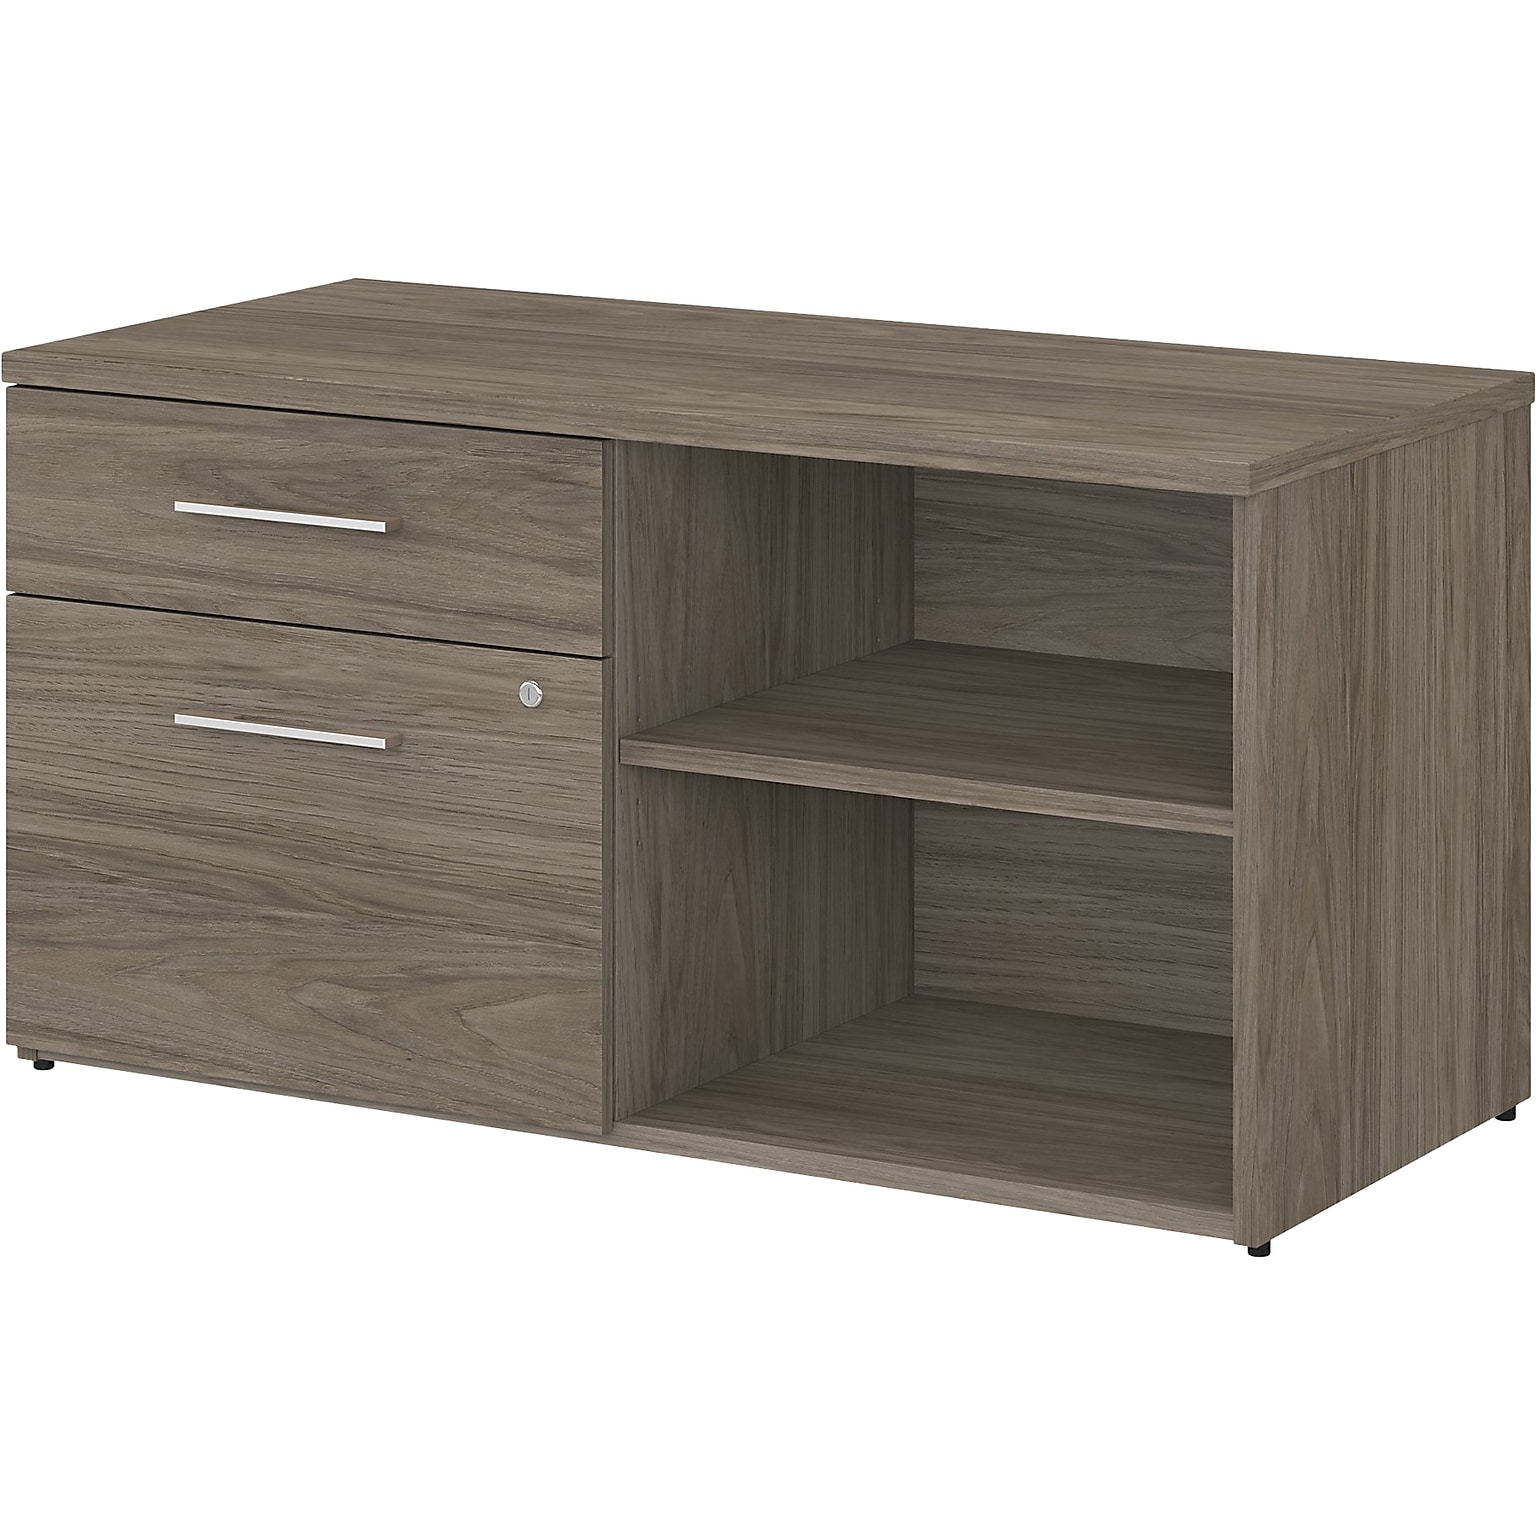 Bush Business Furniture Office 500 23.2 Storage Cabinet with Two Shelves, Modern Hickory (OFS145MH)